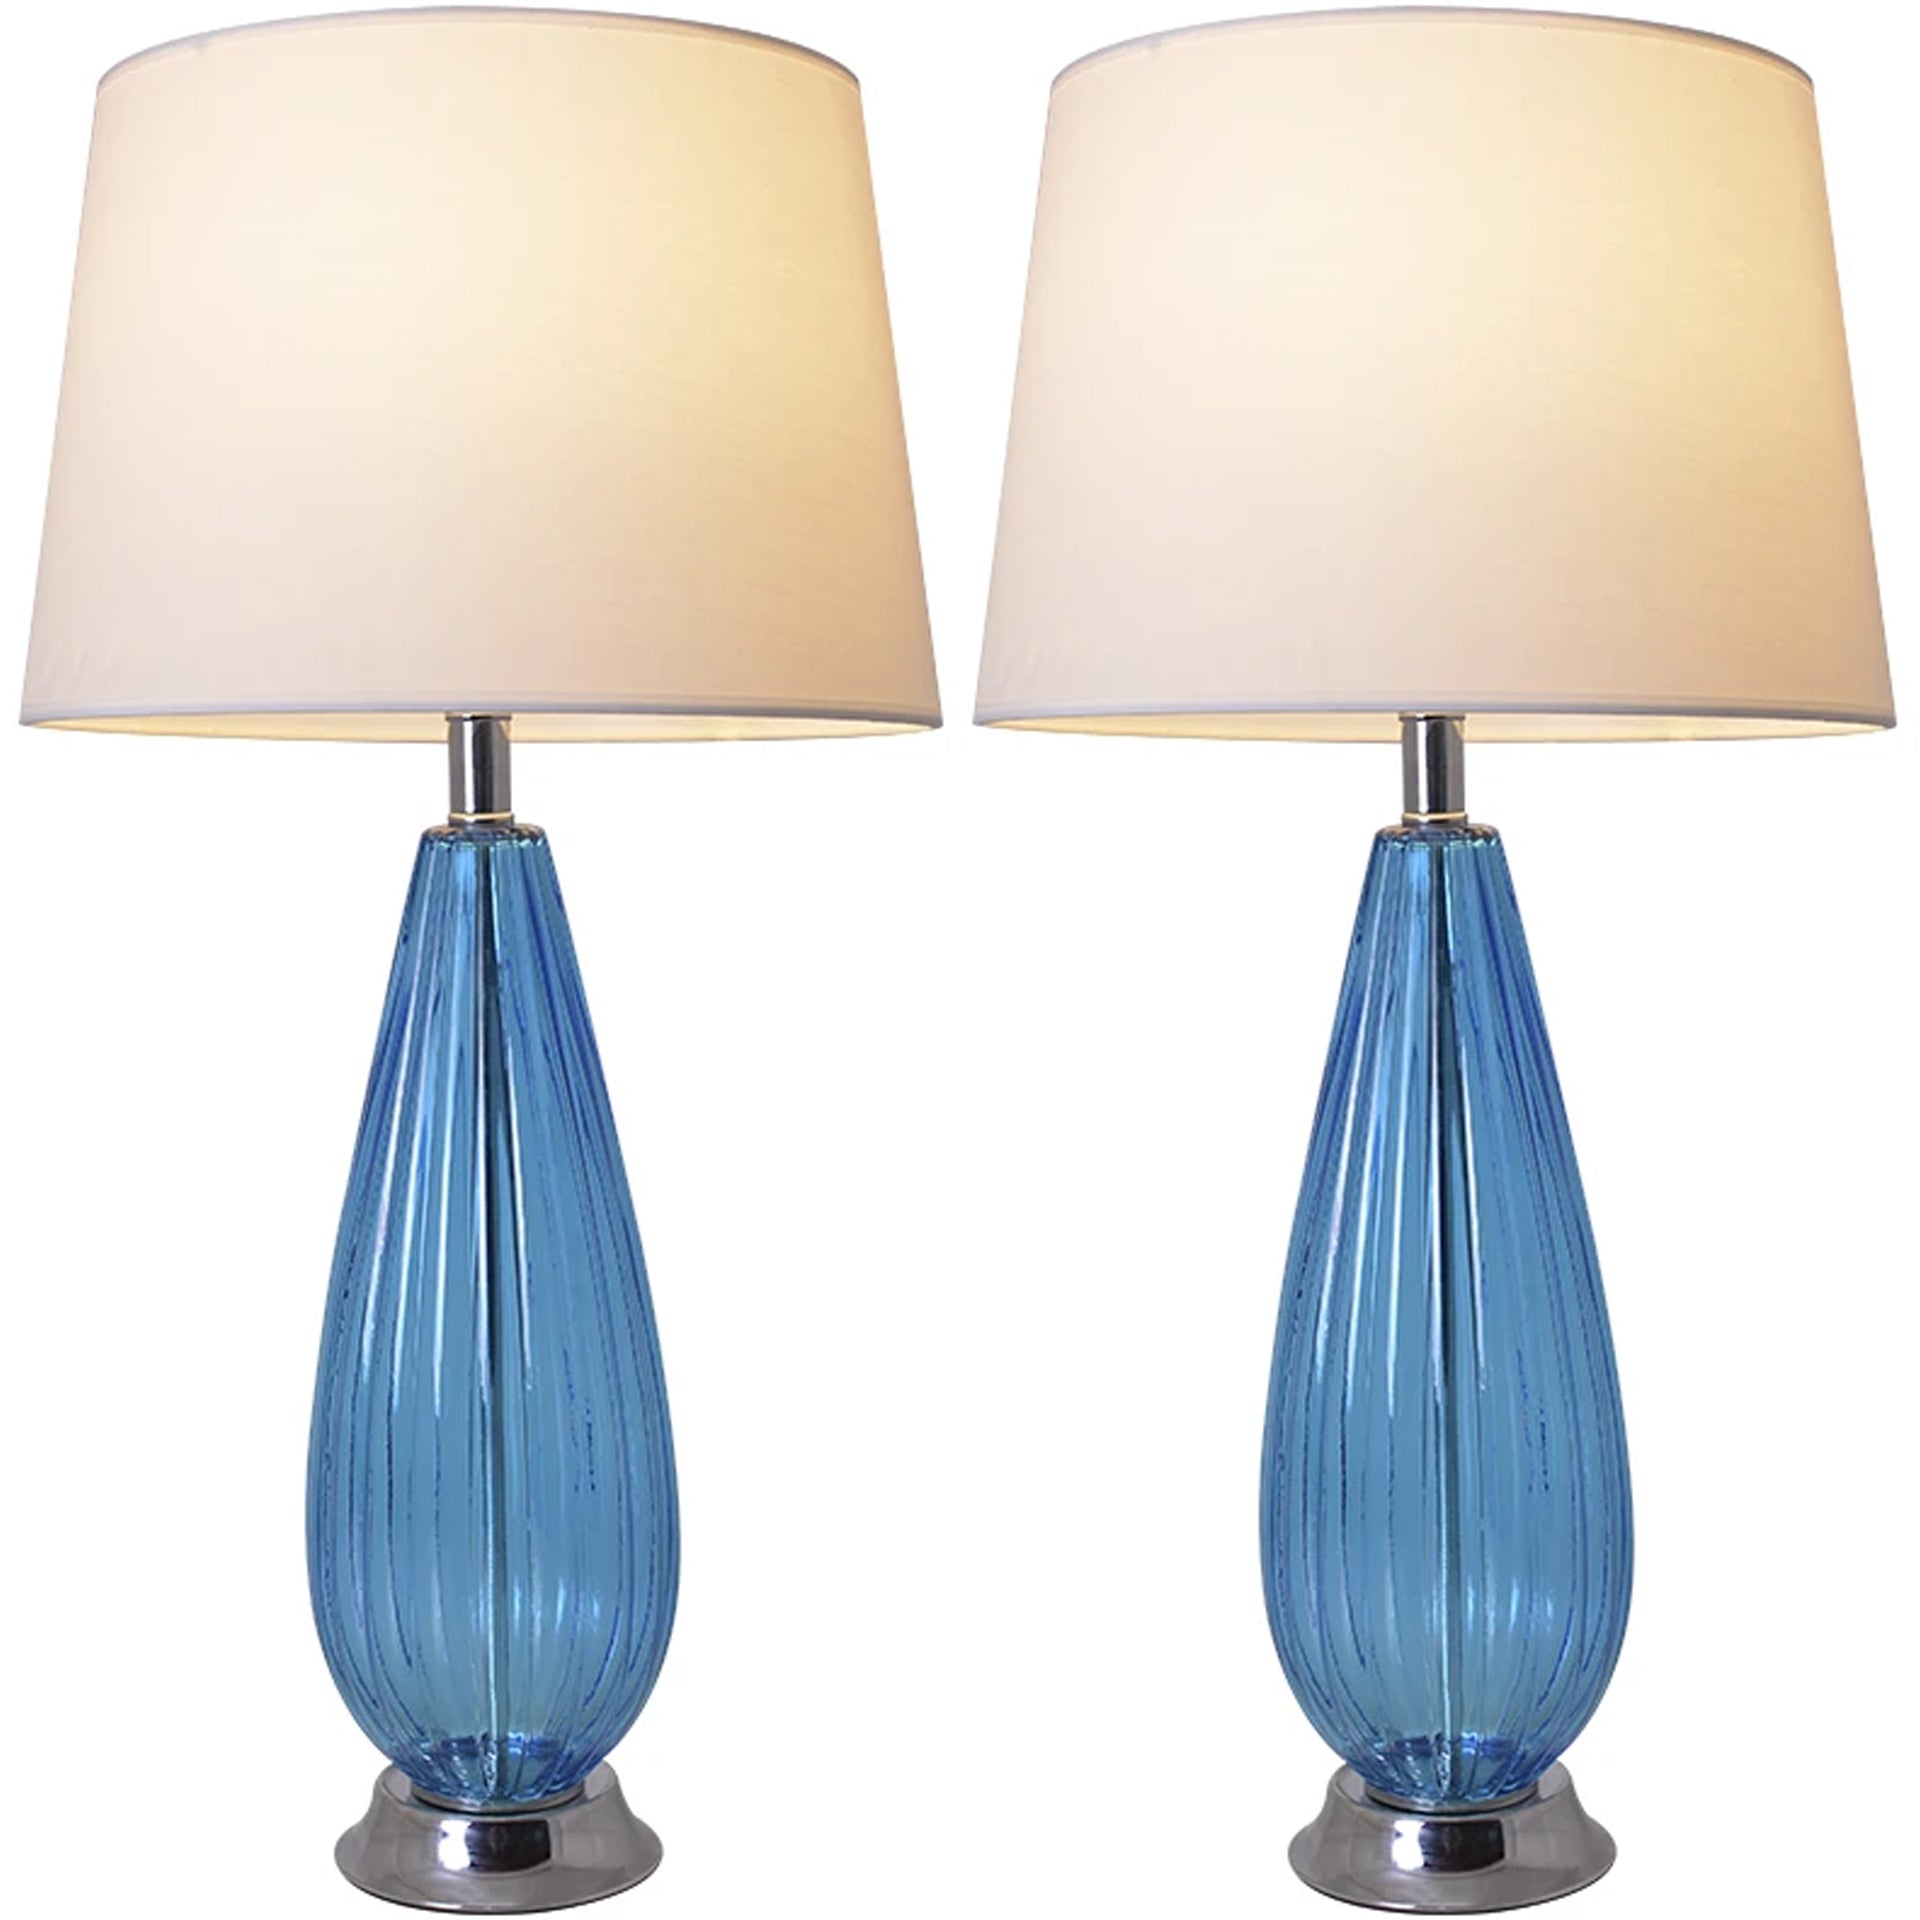 Carro Home Magnolia Translucent Glass Table Lamp 28&quot; - Sky Blue/Ivory White (Set of 2)